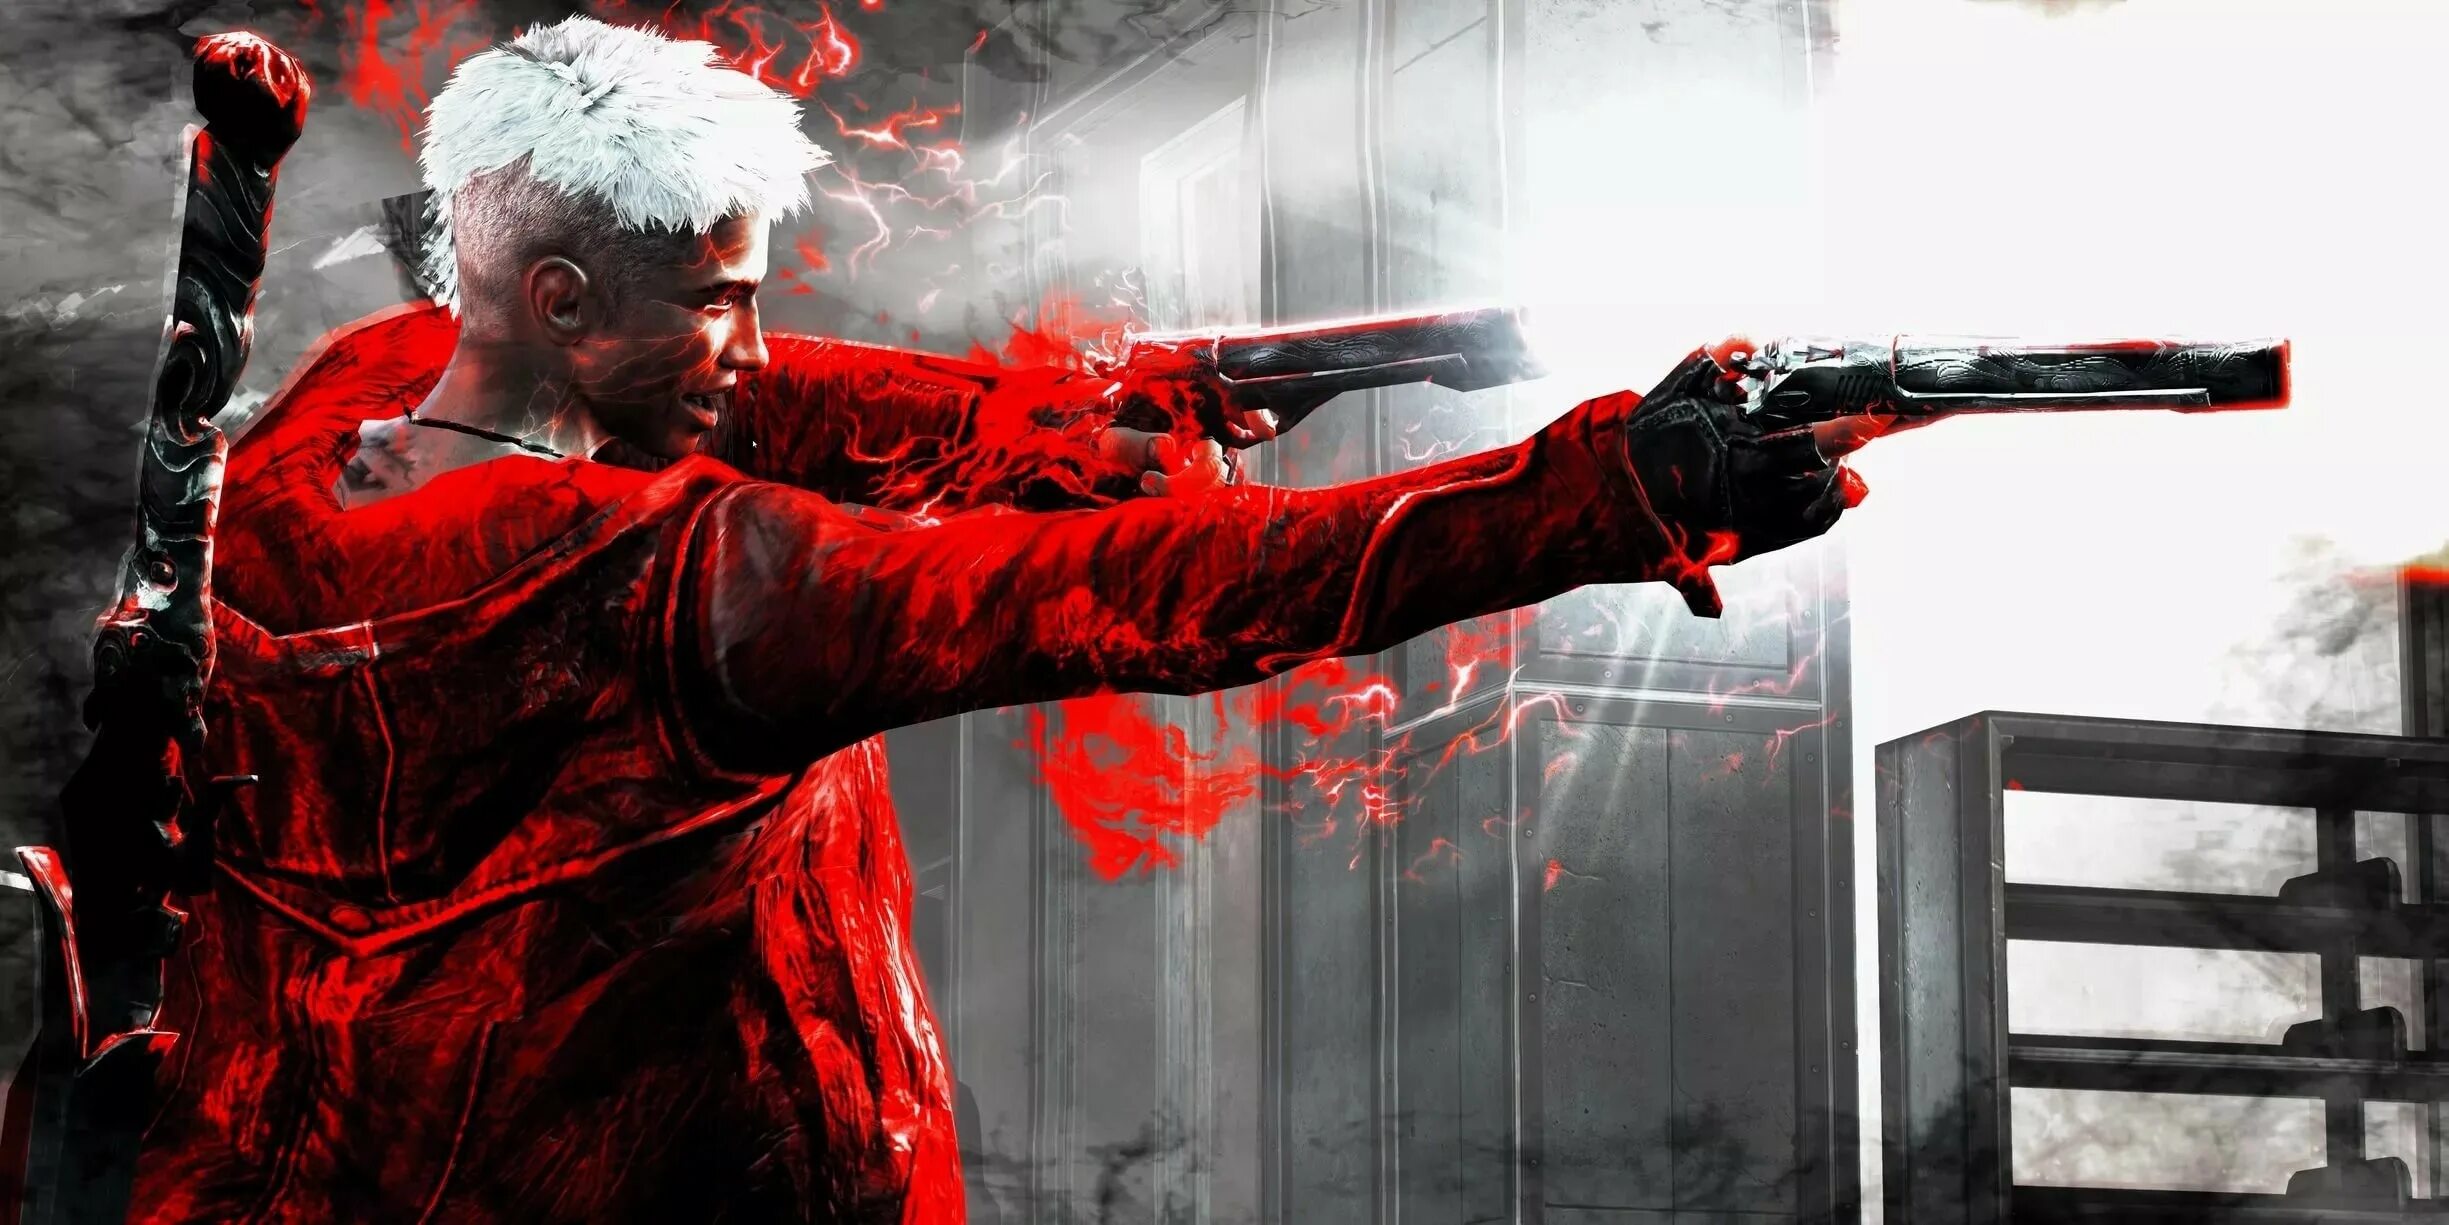 DMC Devil May Cry. Devil May Cry Definitive Edition. Devil May Cry 2013. DMC Devil May Cry 5. Dmc стим